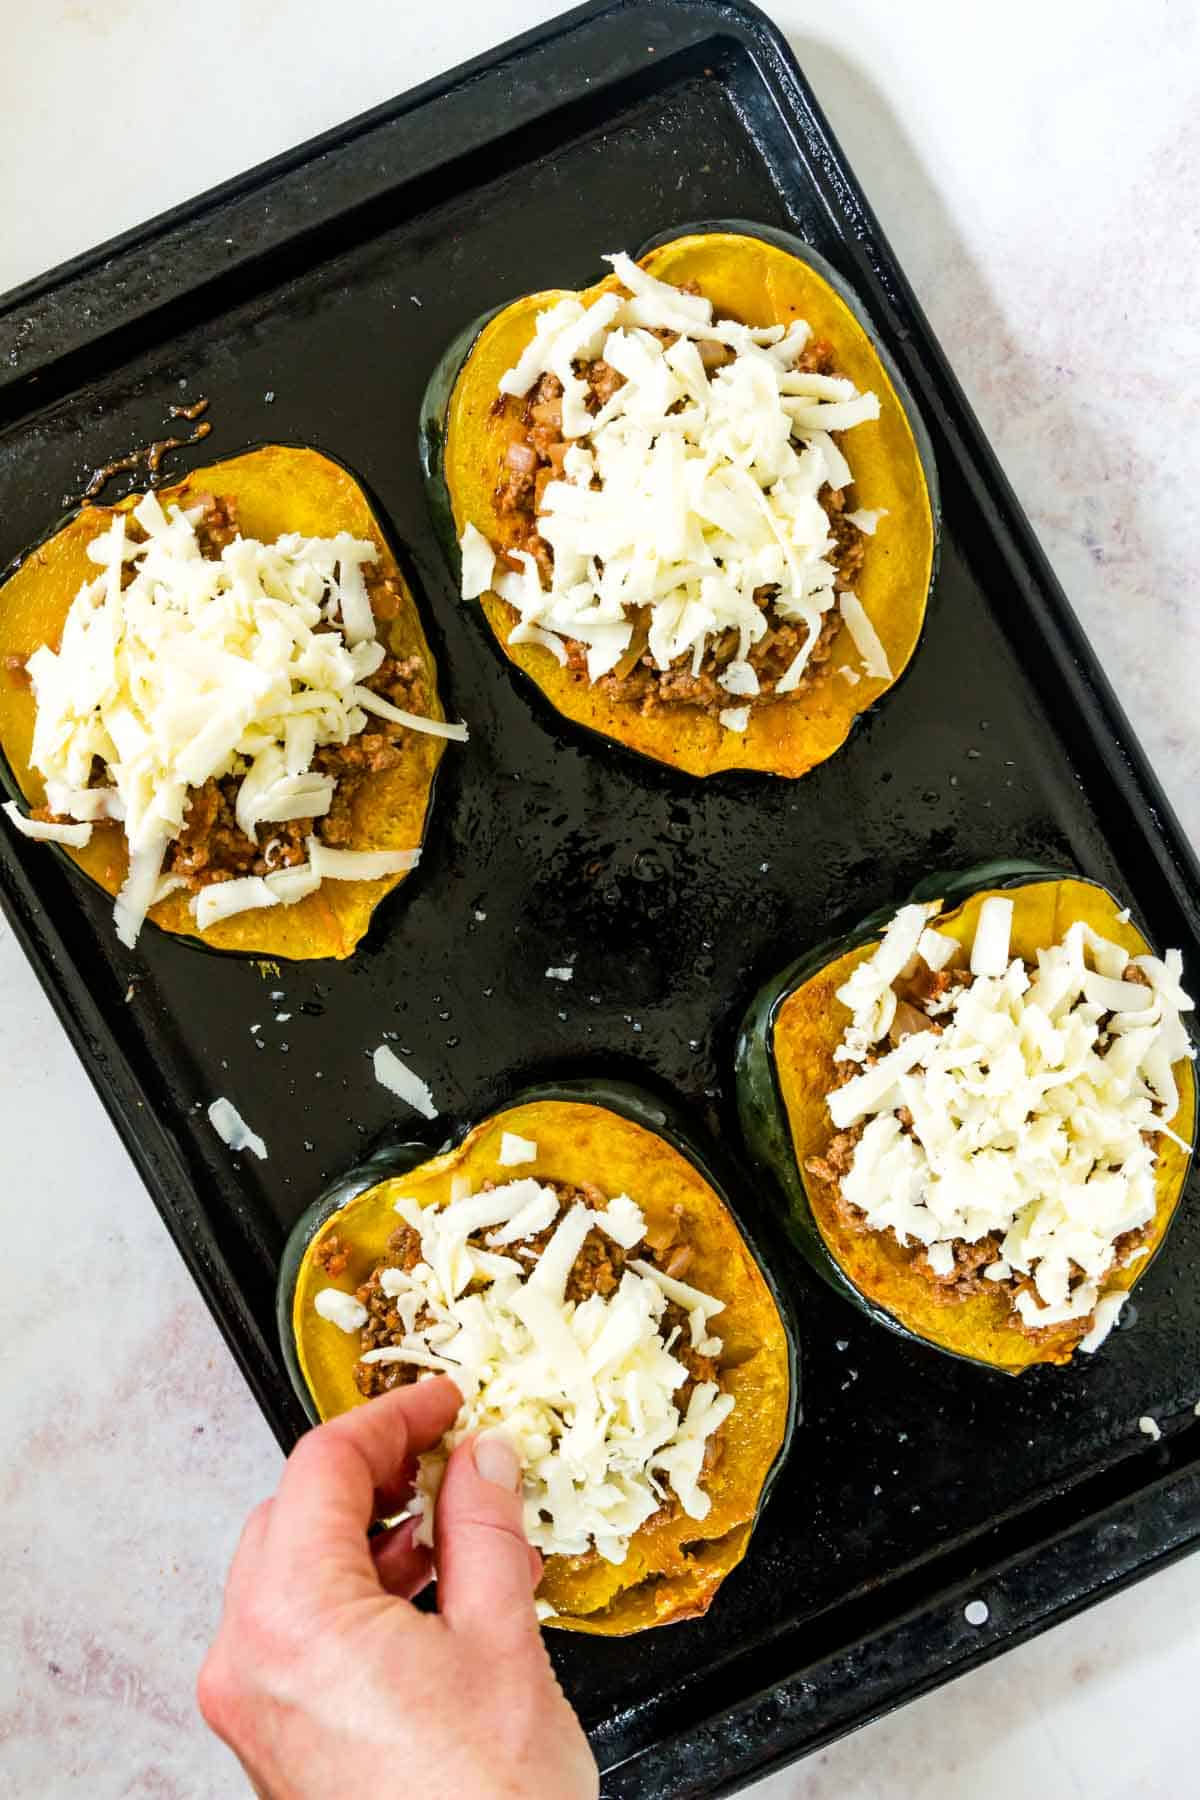 Mozzarella cheese being sprinkled over the stuffed acorn squash halves on a sheet pan.